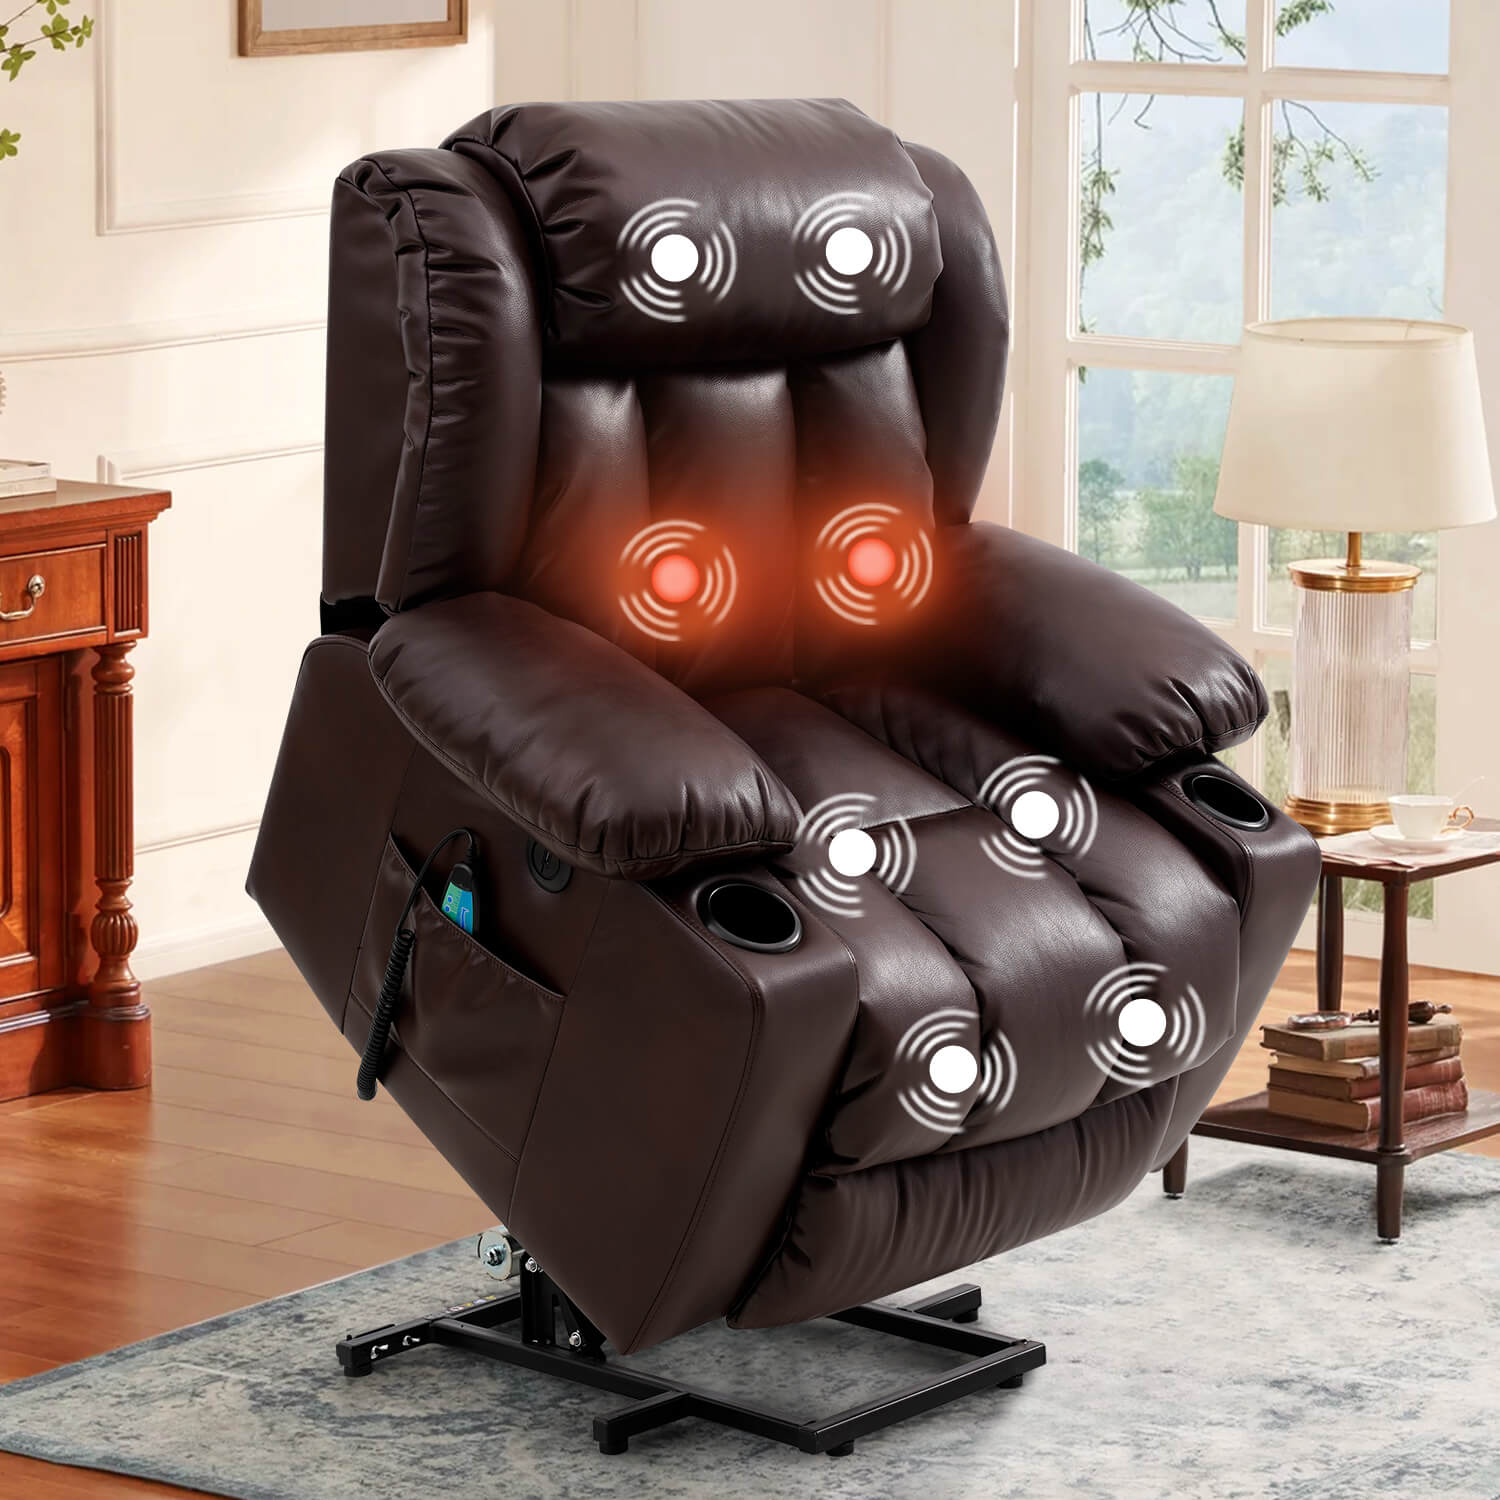 Soulout Luxury Lift Chair Recliner with Heat and Massage Point